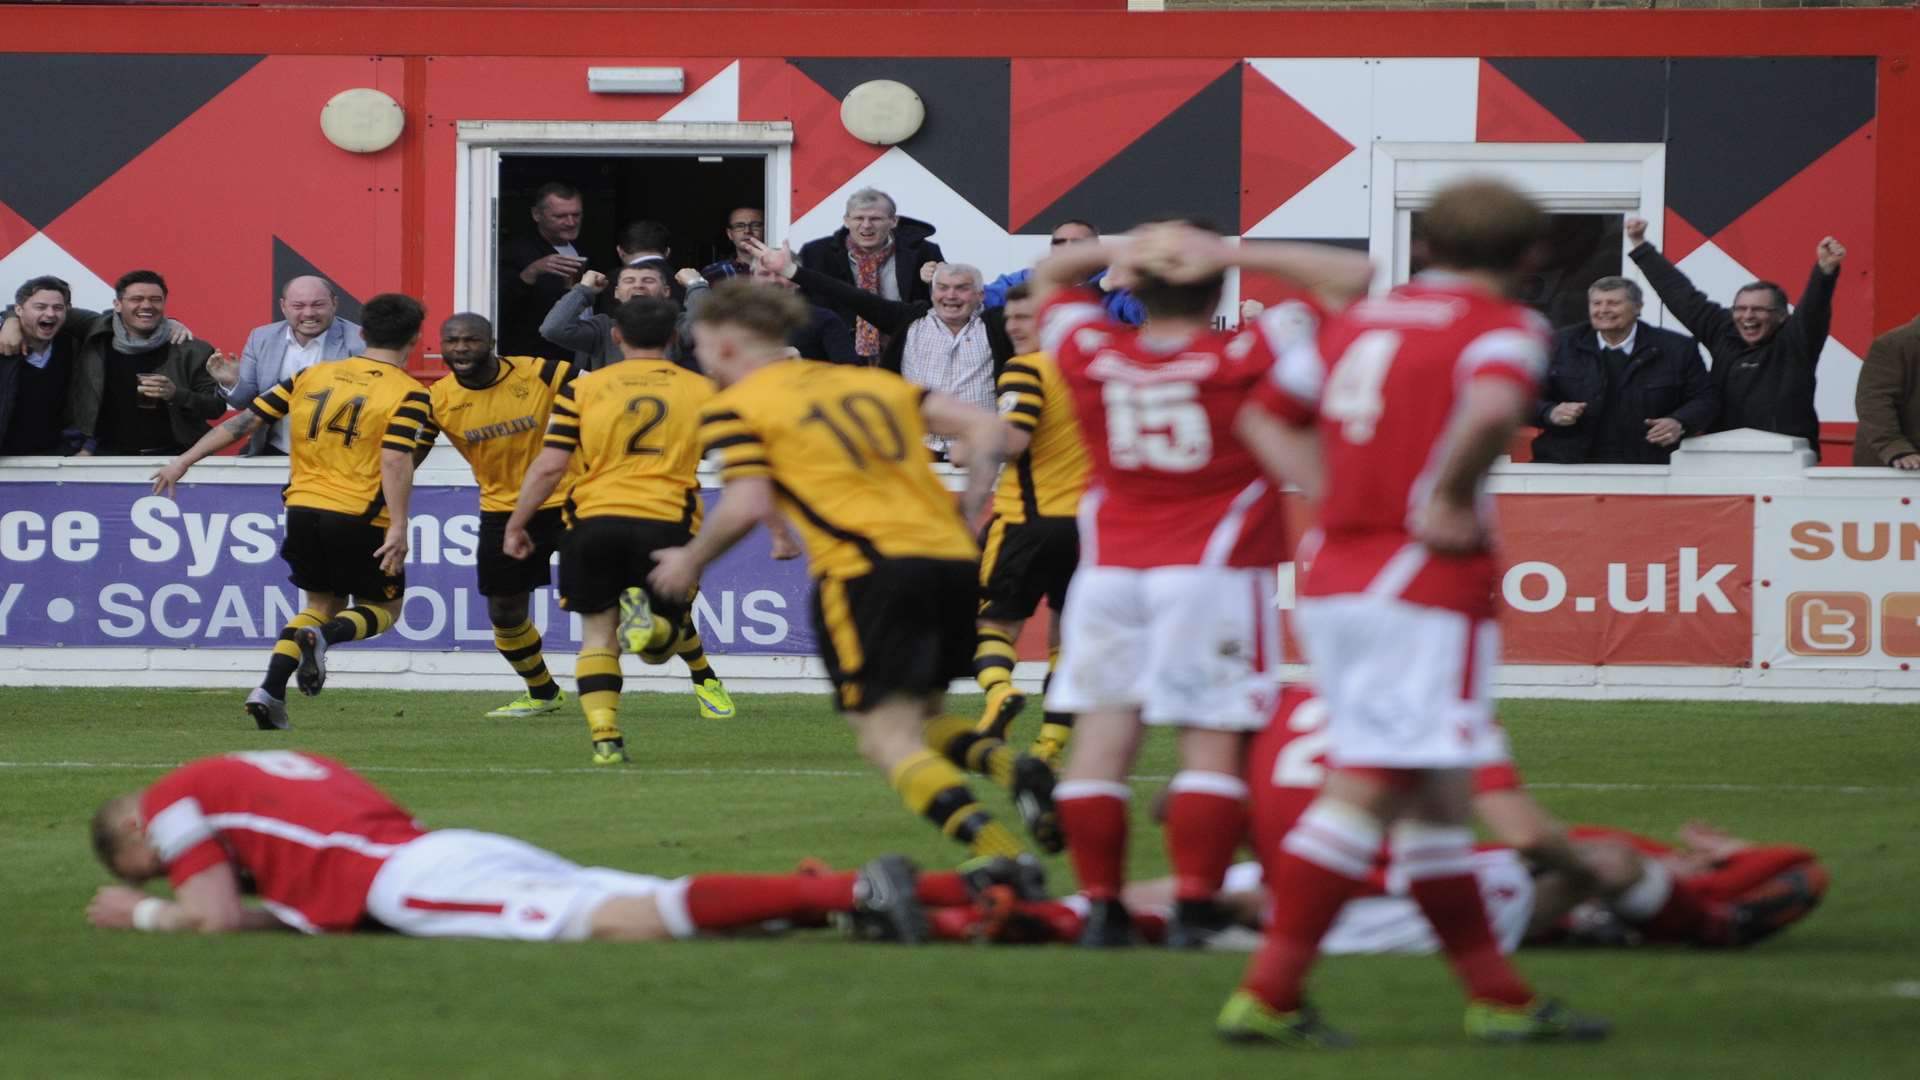 Stuart Lewis (4) can't believe it as Maidstone make it 2-2 in the play-off final Picture: Gary Browne